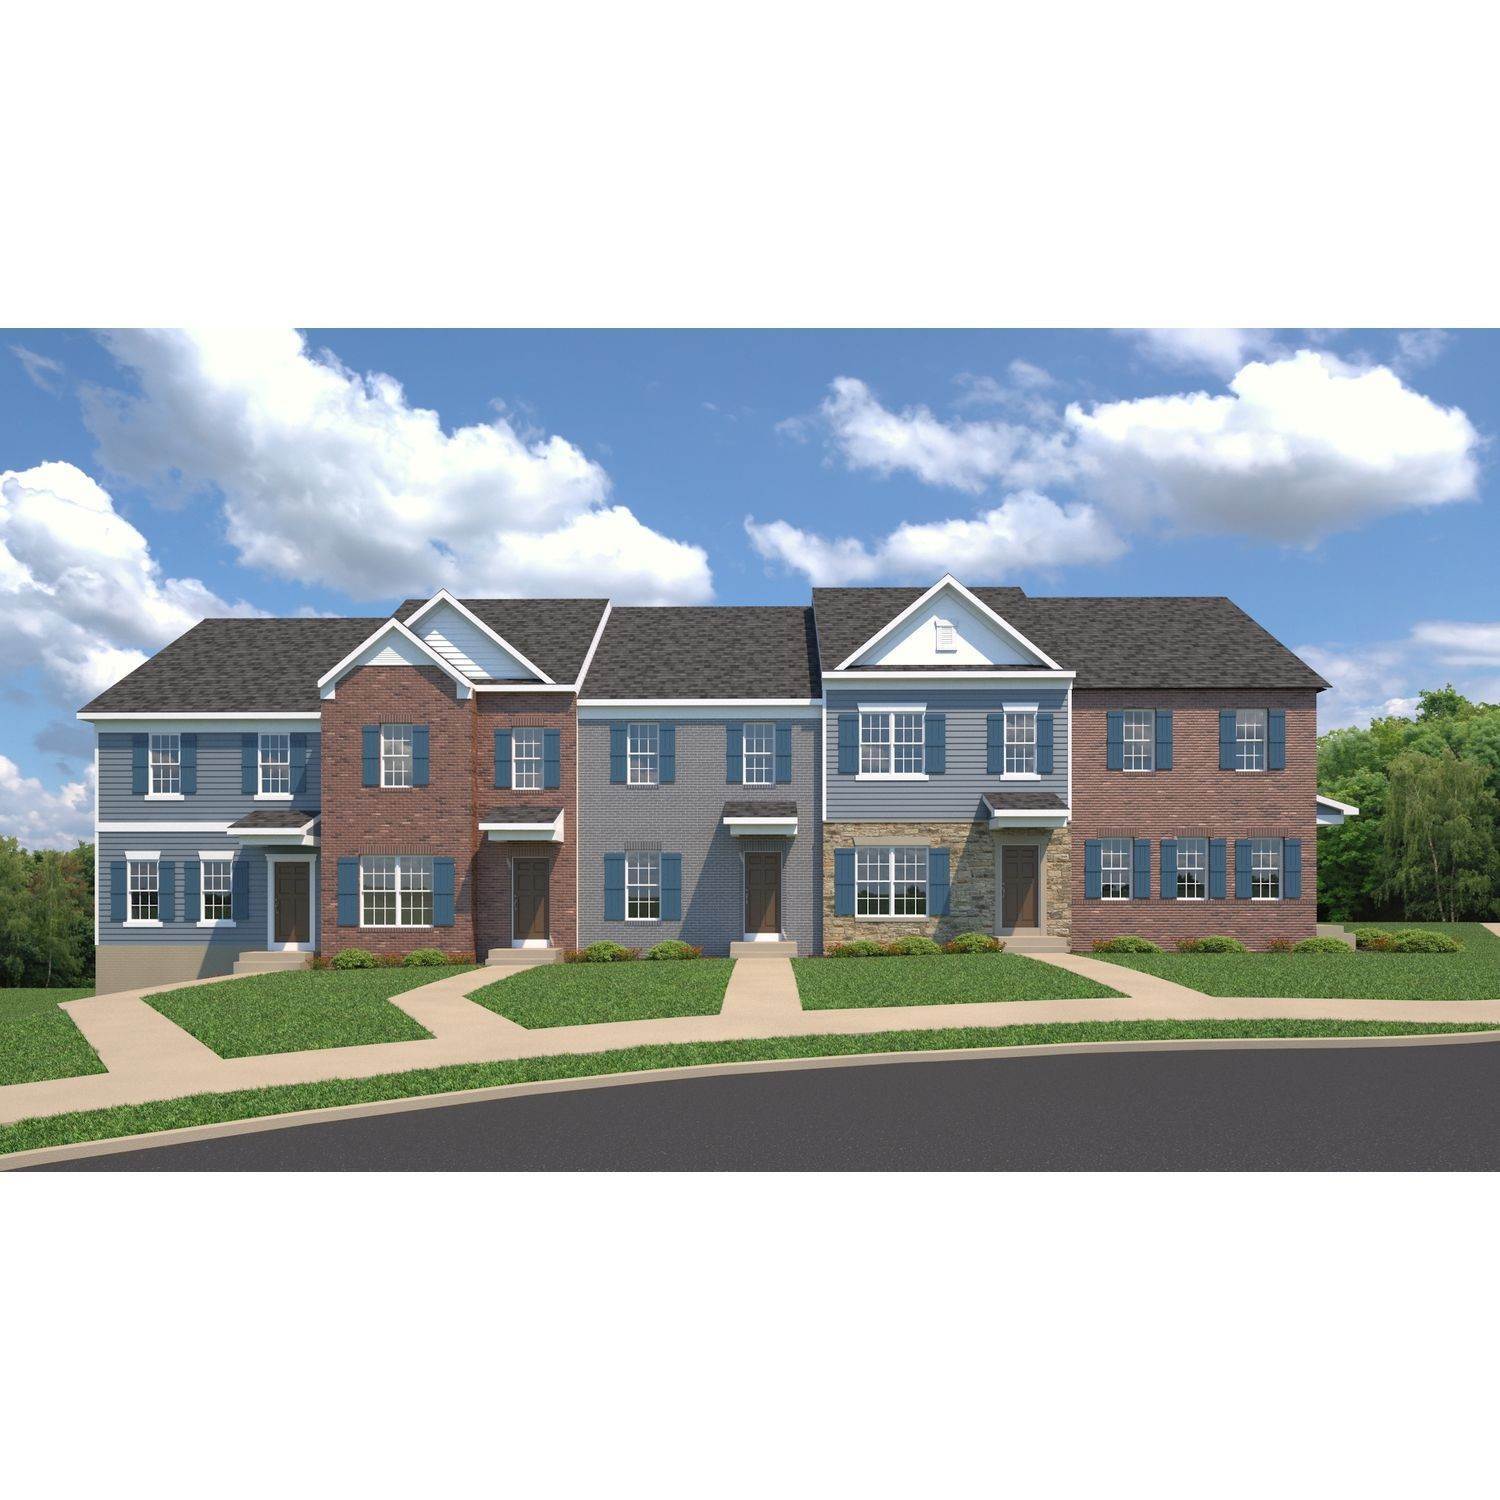 Townhouse for Sale at Clinton, MD 20735